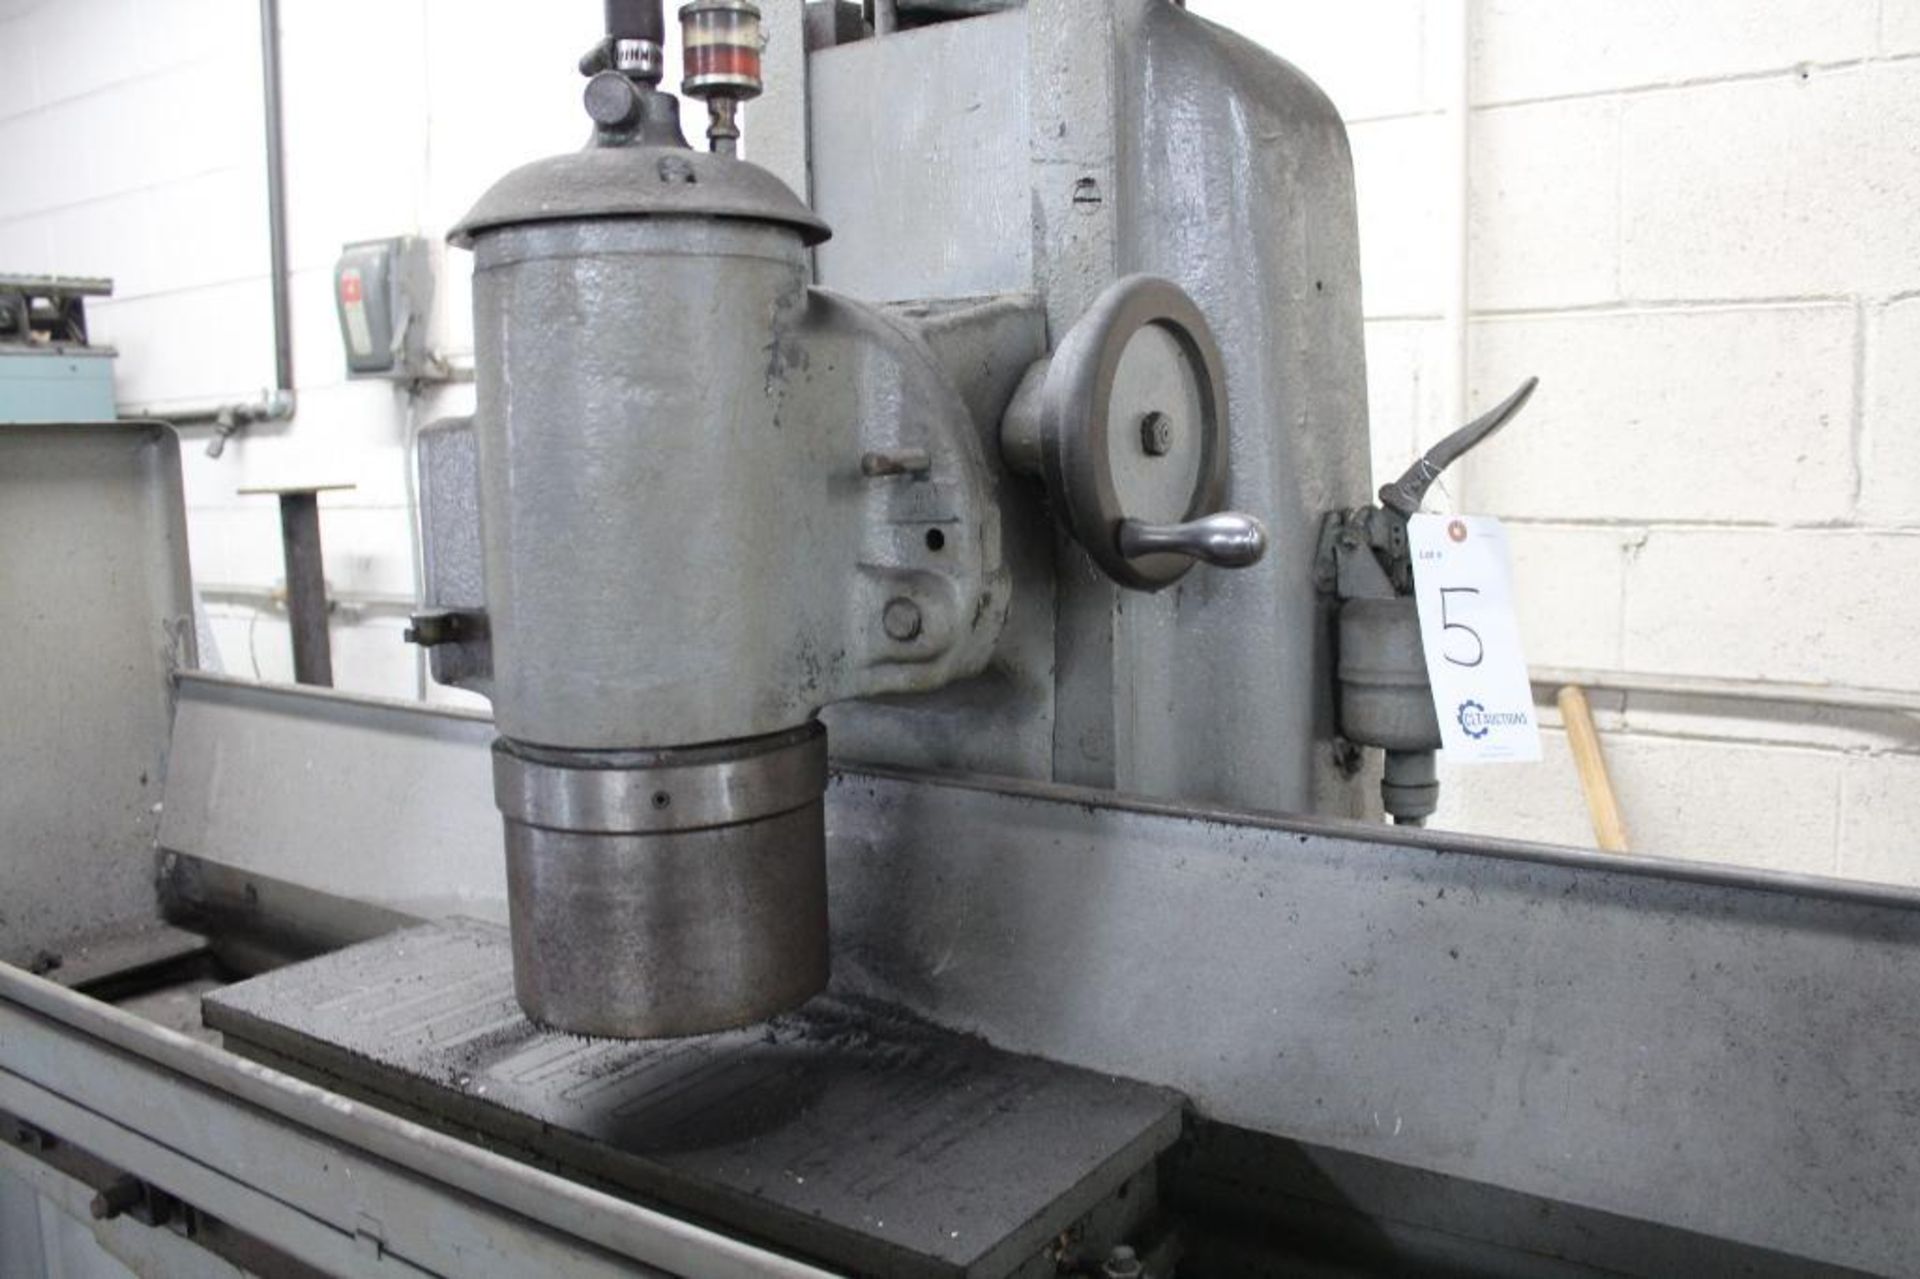 Abrasive Machine Tool No. 34 rotary surface grinder - Image 6 of 6